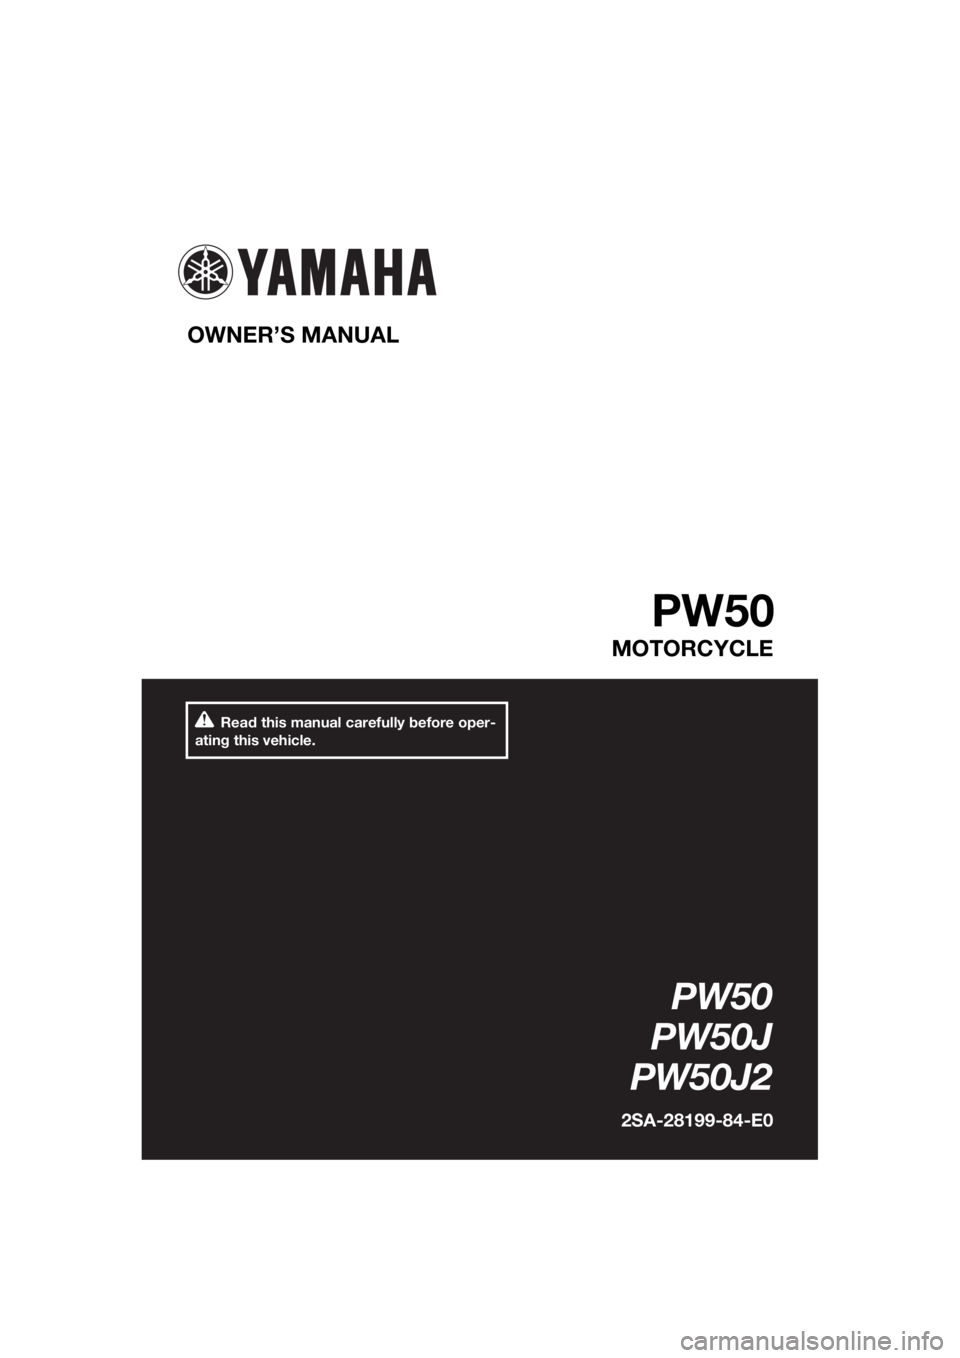 YAMAHA PW50 2018  Owners Manual Read this manual carefully before oper-
ating this vehicle.
OWNER’S MANUAL 
PW50
MOTORCYCLE
PW50
PW50J
PW50J2
2SA-28199-84-E0
U2SA84E0.book  Page 1  Wednesday, May 10, 2017  9:37 AM 